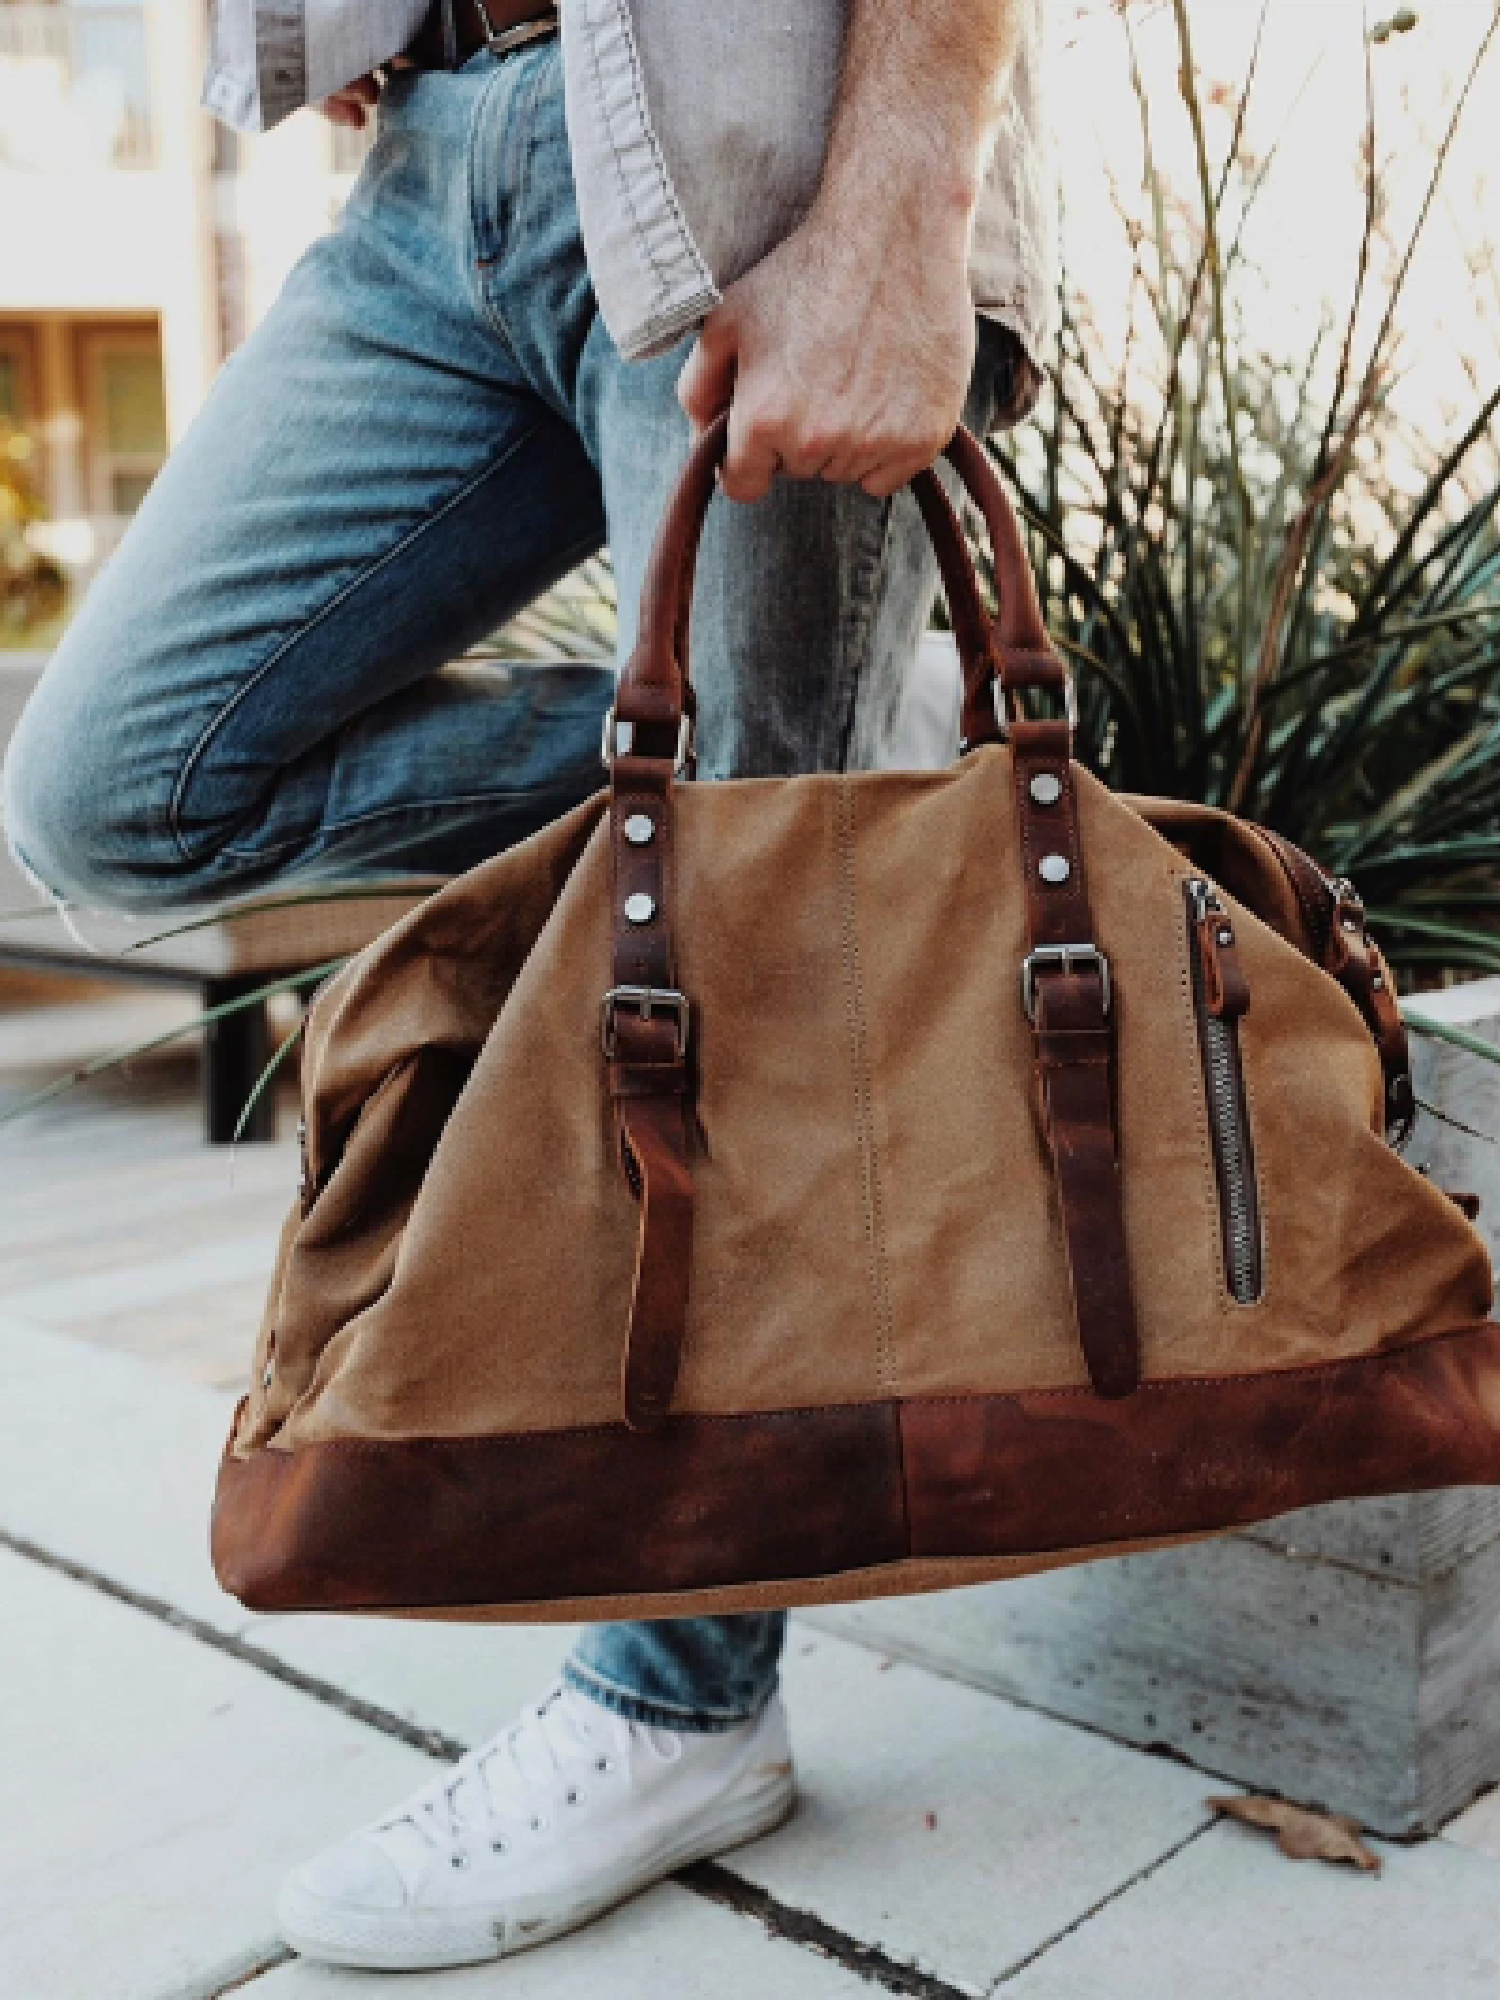 The Hudson Waxed Canvas Duffle Bag – Sturdy Brothers